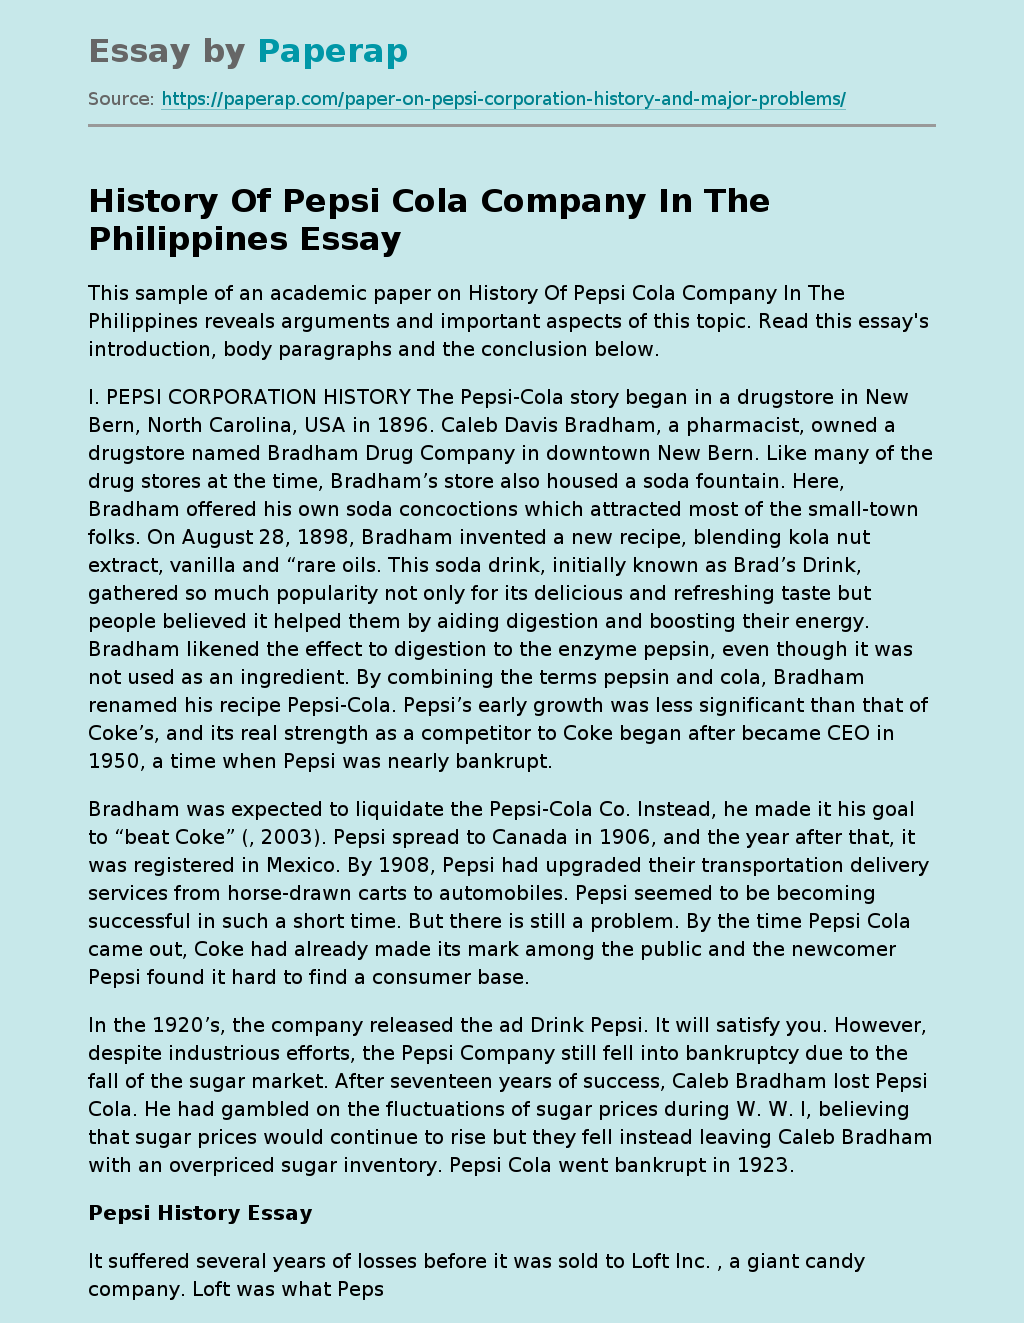 History Of Pepsi Cola Company In The Philippines